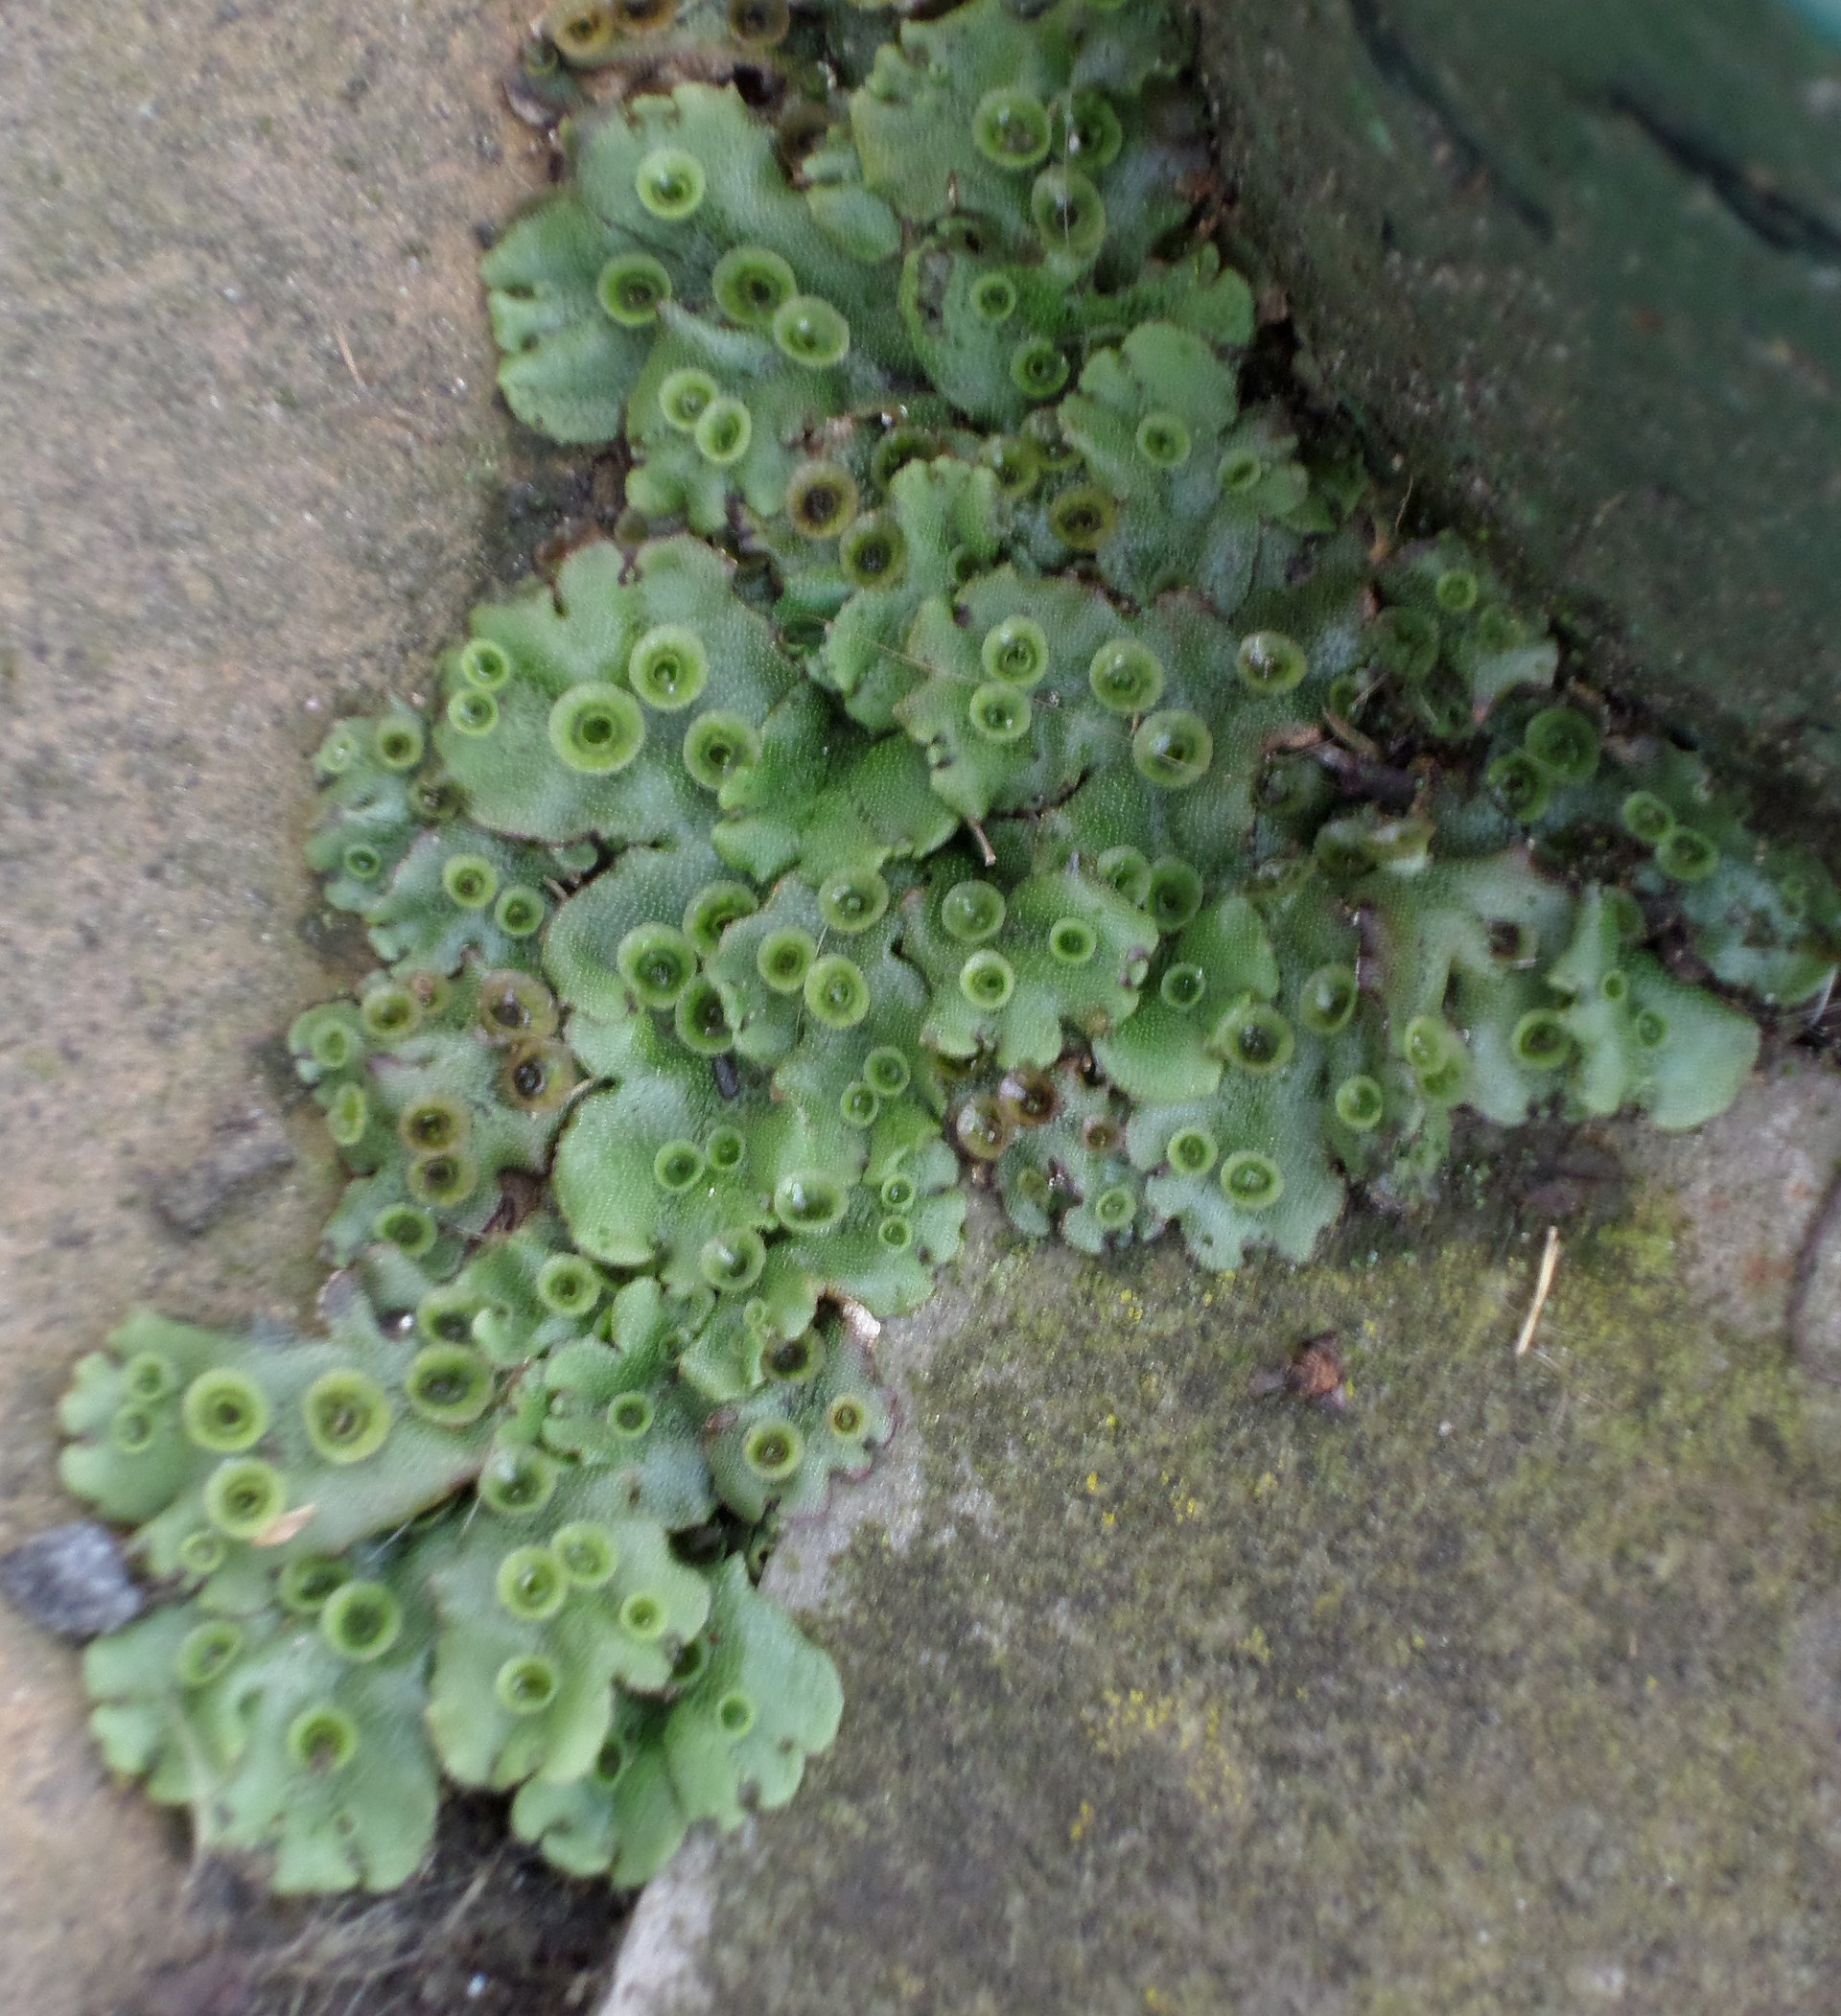 Liverwort growing between rocks, some of the leaves look flat and have bunched edges, some grow in small coiled "cups"